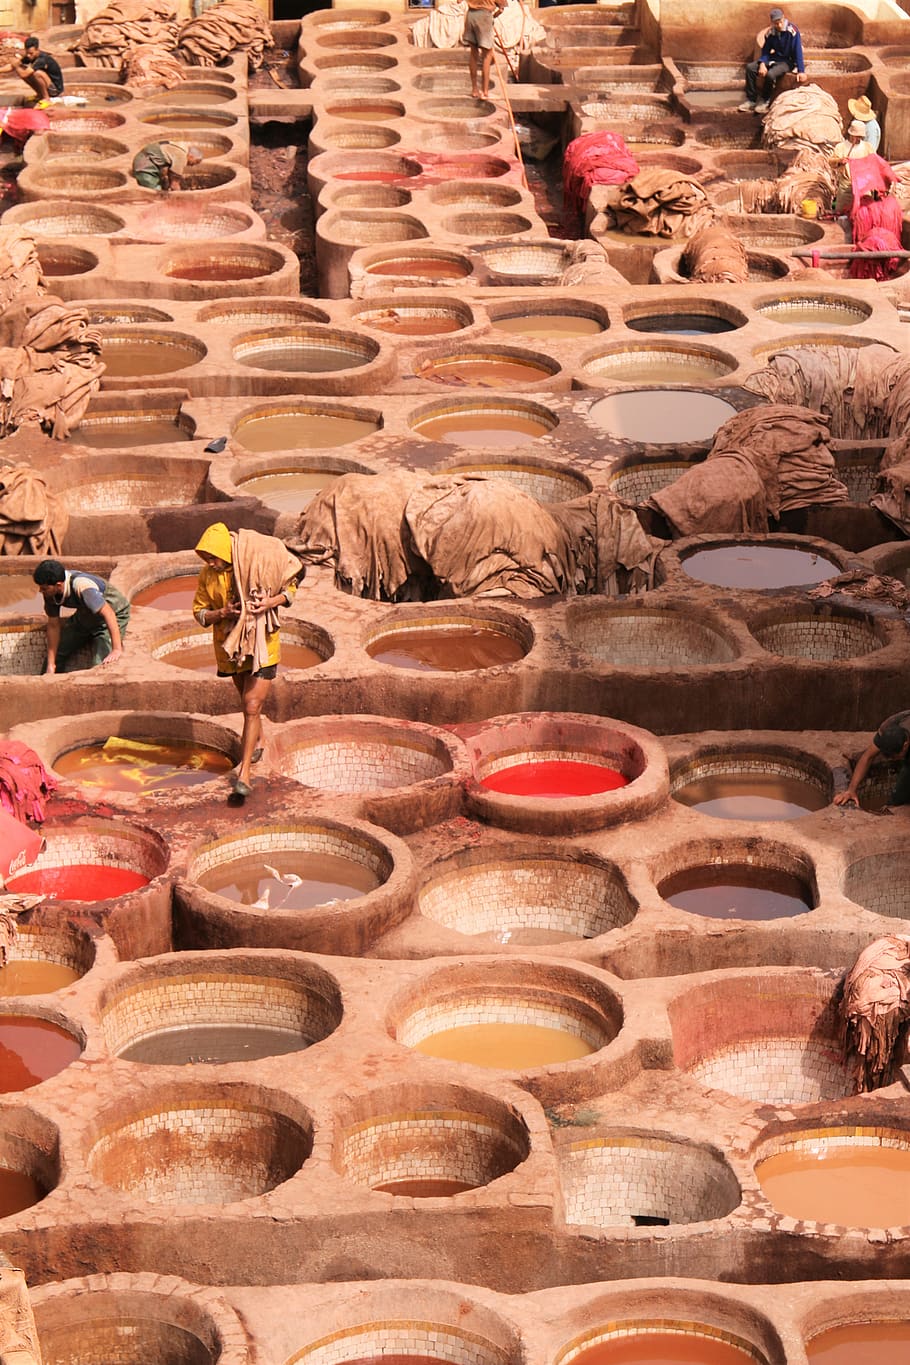 dyeing, tradition, morocco, kasbah, craft, fes, jars, poverty, architecture, high angle view